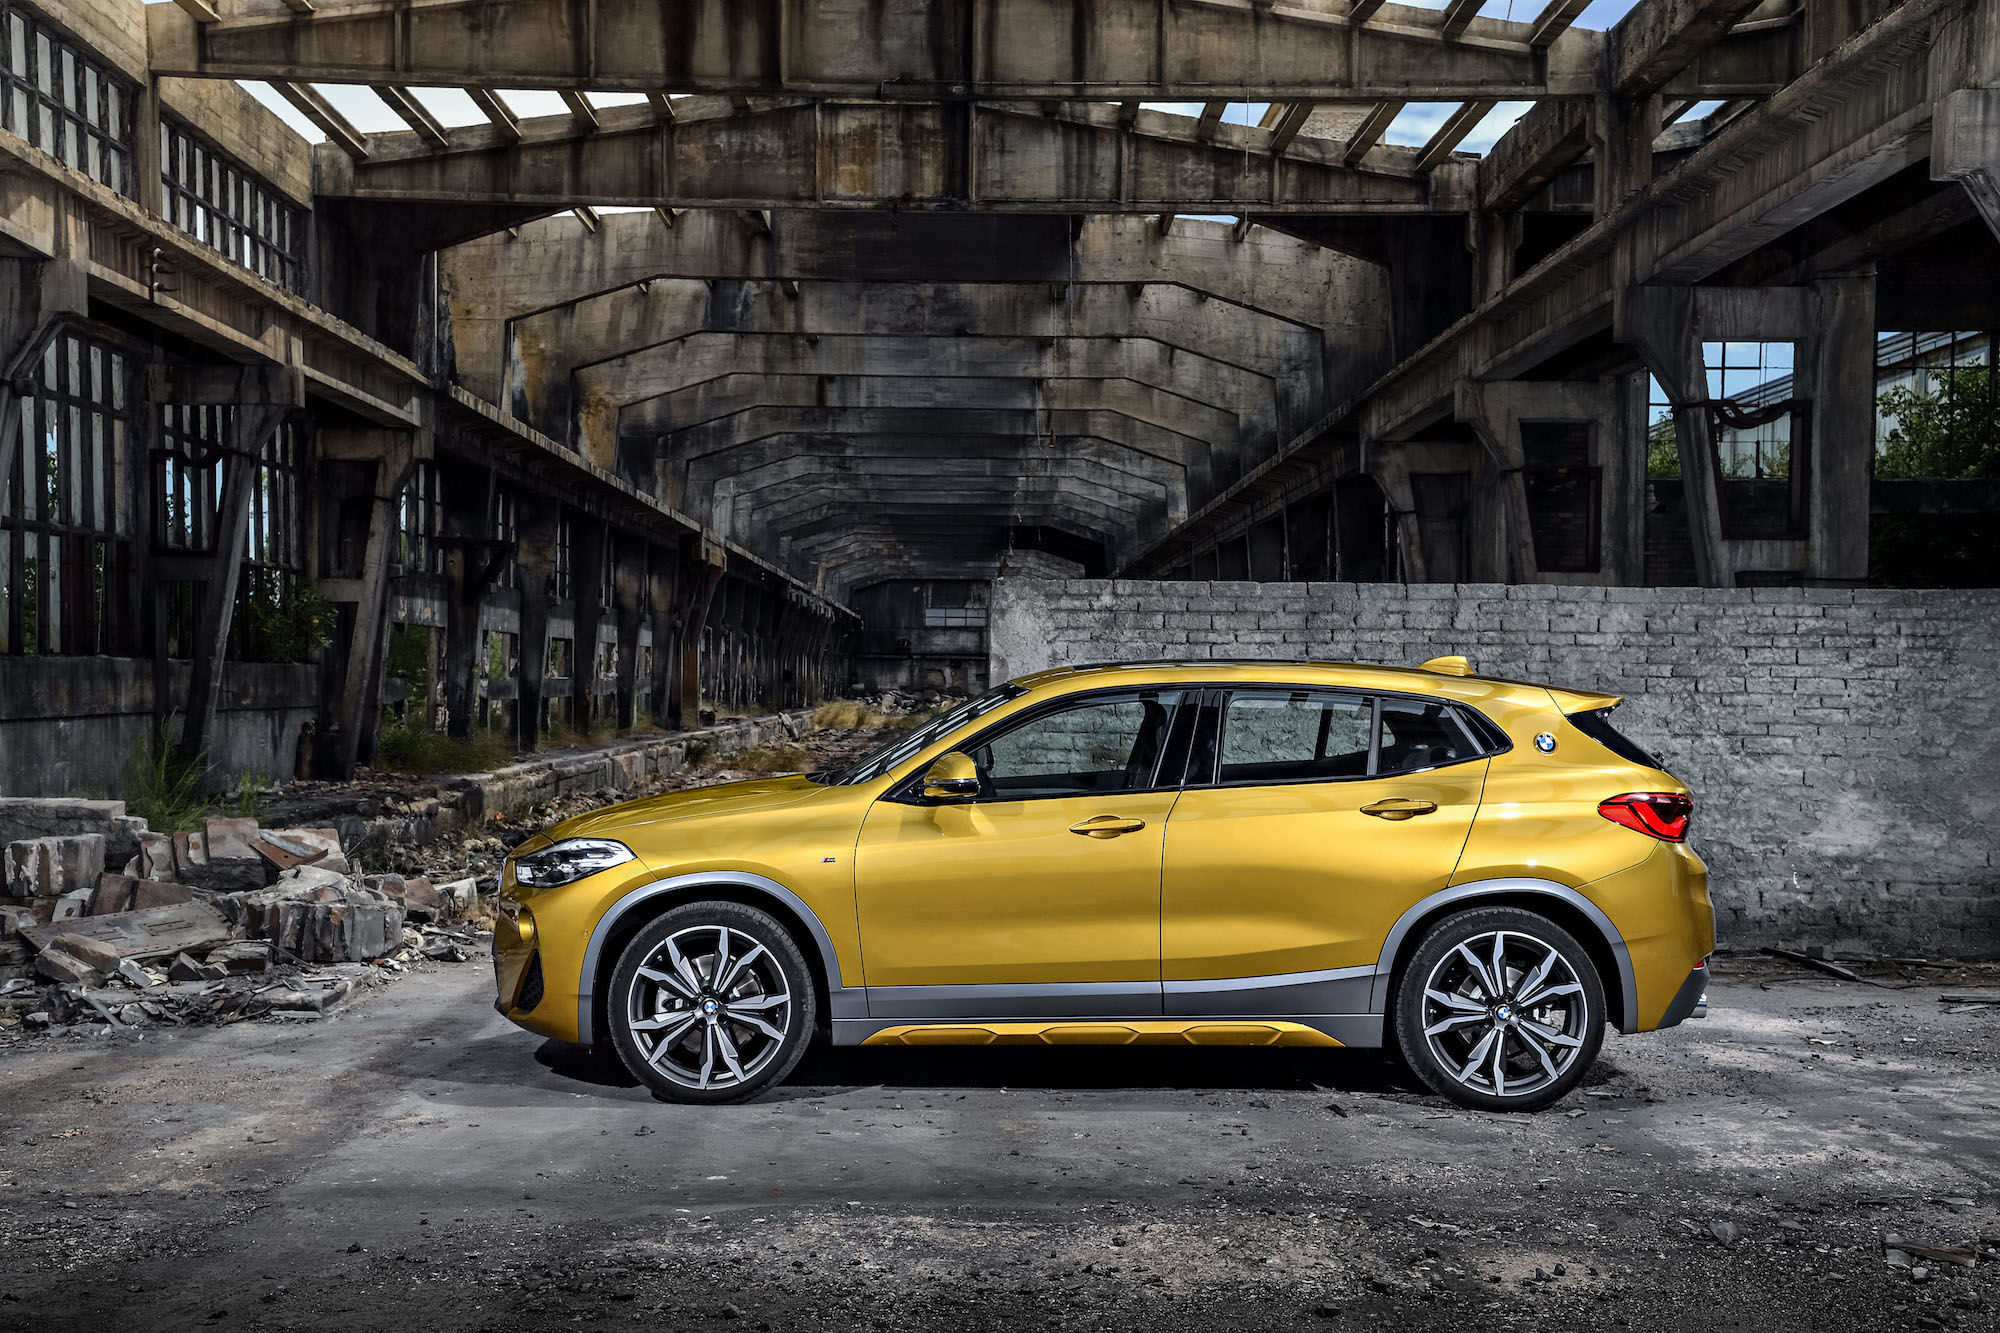 Here’s what you need to know about the all-new 2018 BMW X2